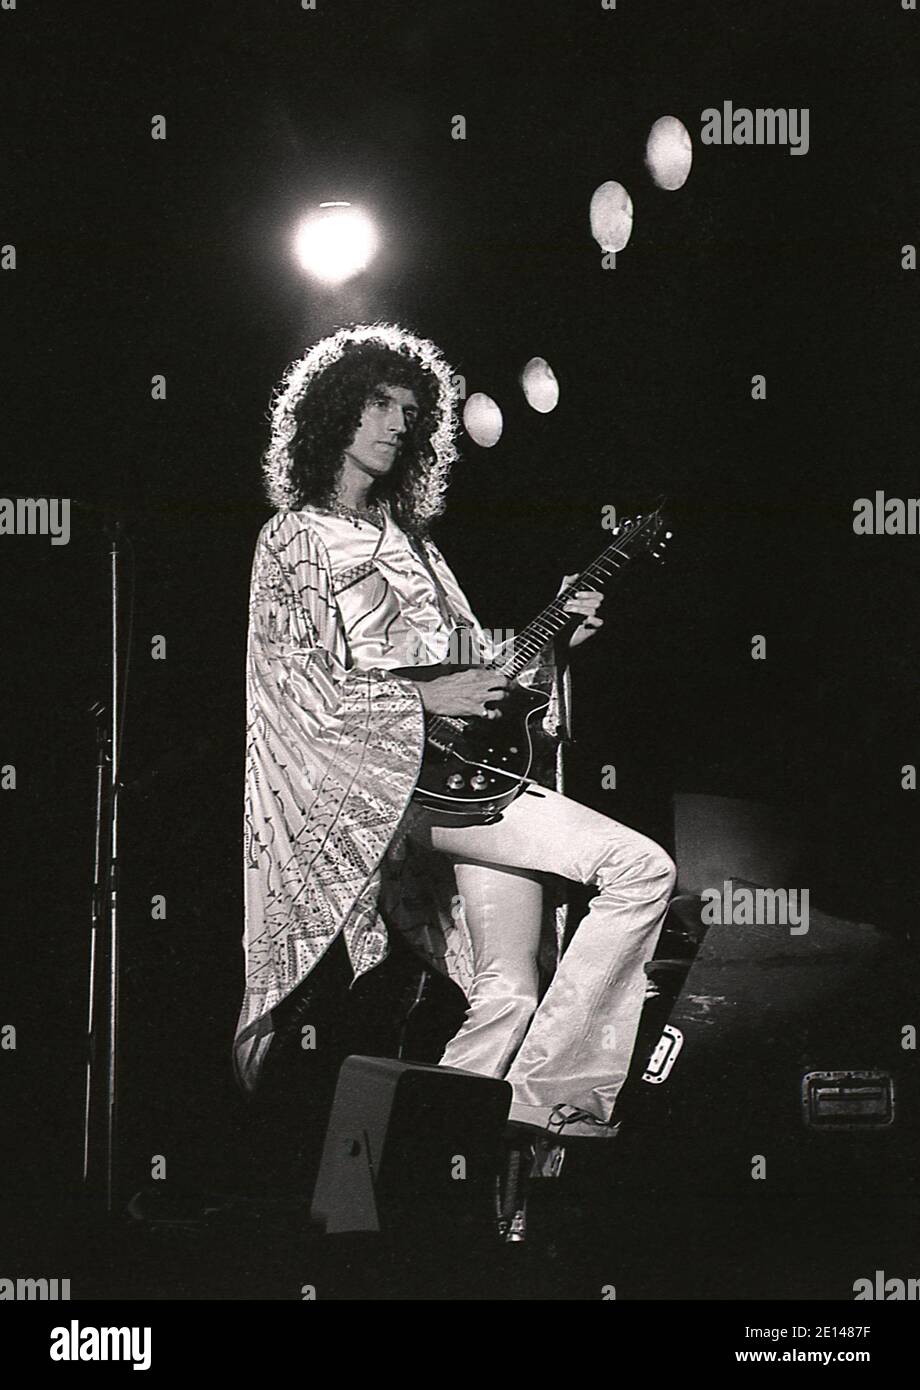 Brian May guitarist of Queen. Live in Hyde Park London 18/9/1976. Free concert with 150,000 fans in the Park. Stock Photo